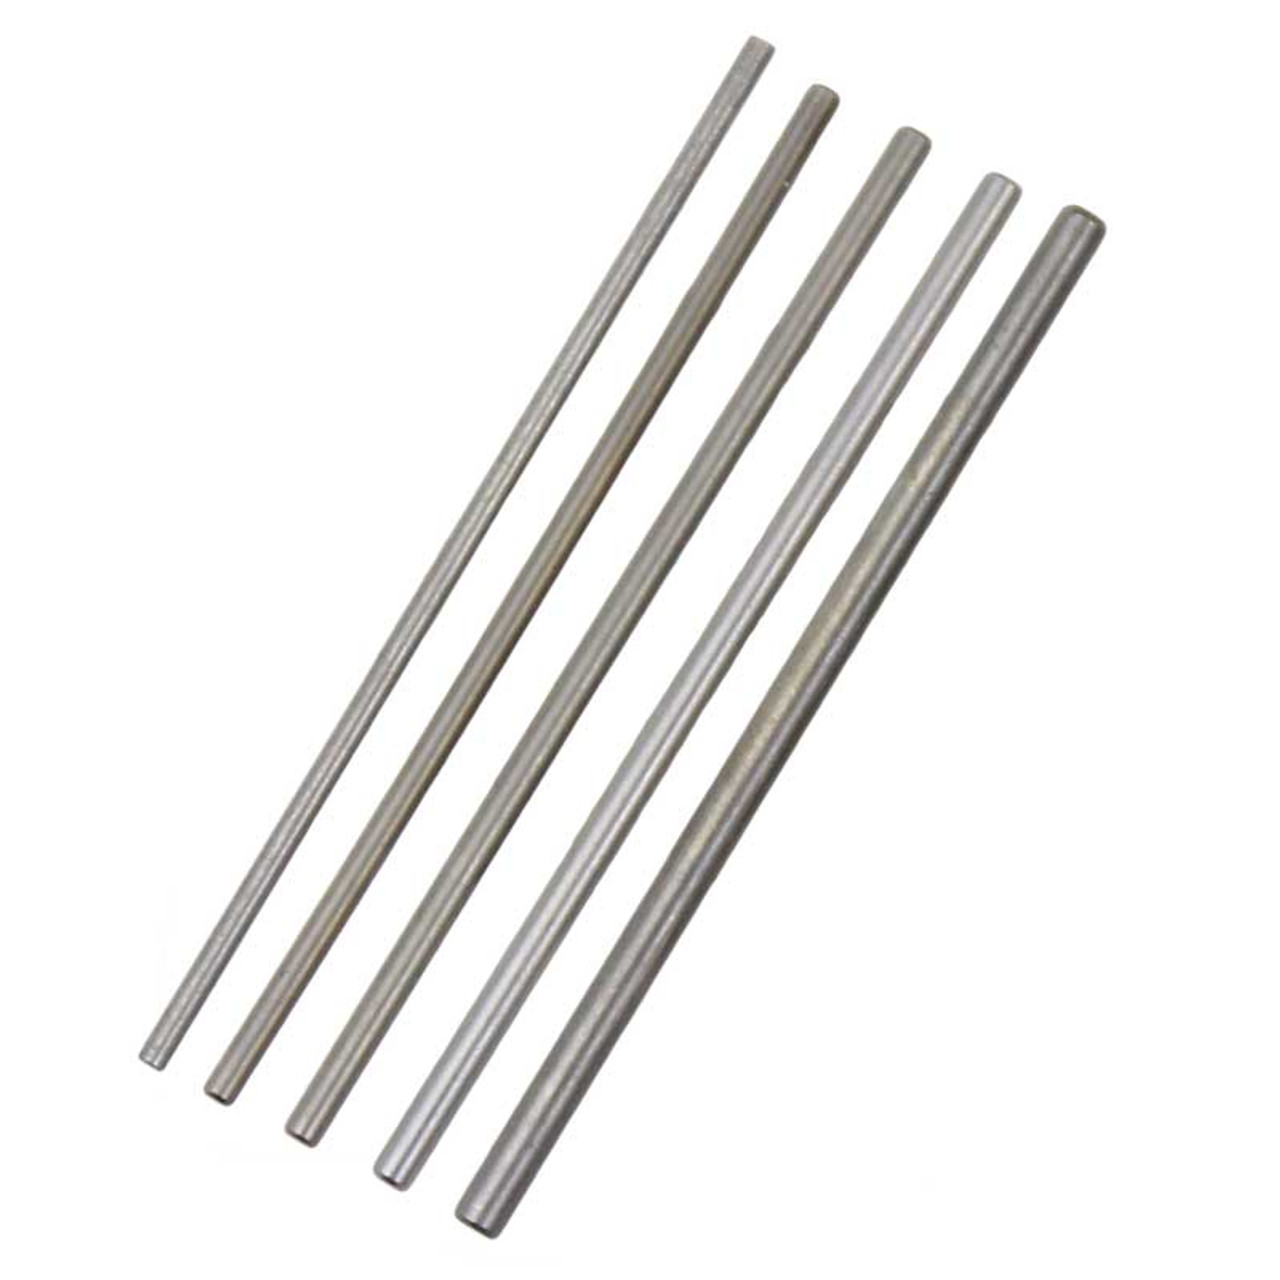 Replacement Pins for Bergeon 6988 Pin Punch set Sold Tube of 3 ...